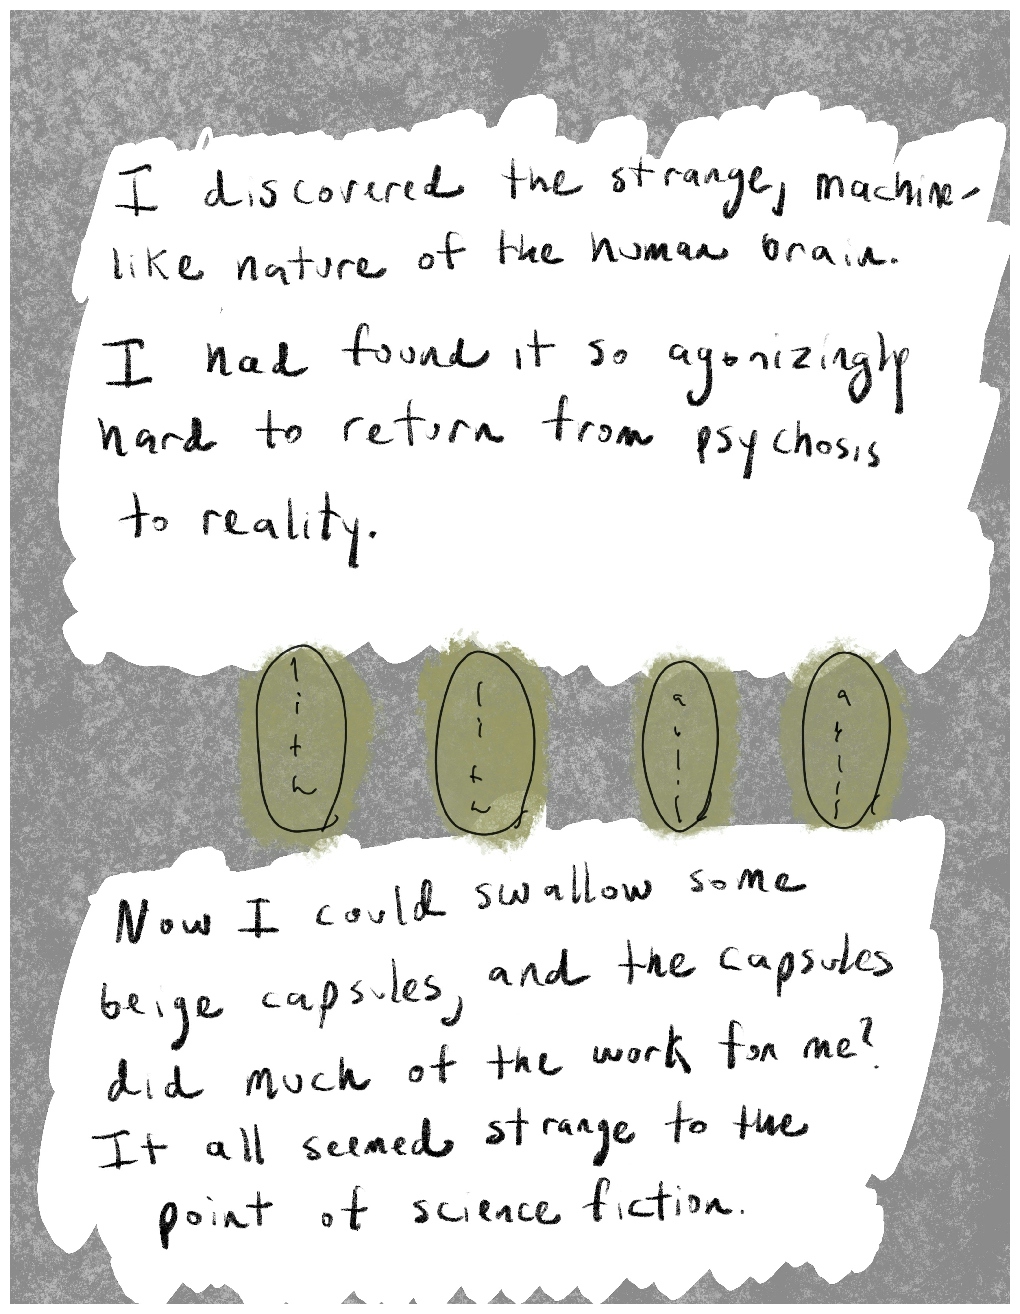 Panel three of a four-panel comic called 'Reclaiming reality', consisting of two blocks of handwritten text on white background, surrounded by a mottled grey background. The block of text in the top half of the panel says "I discovered the strange, machine-like nature of the human brain. I had found it so agonizingly hard to return from psychosis to reality." The block of text in the lower half of the panel says "Now I could swallow some beige capsules, and the capsules did much of the work for me? It all seemed strange to the point of science fiction.". Between the two blocks of text is a row of four oval shapes coloured in beige, representing tablets.